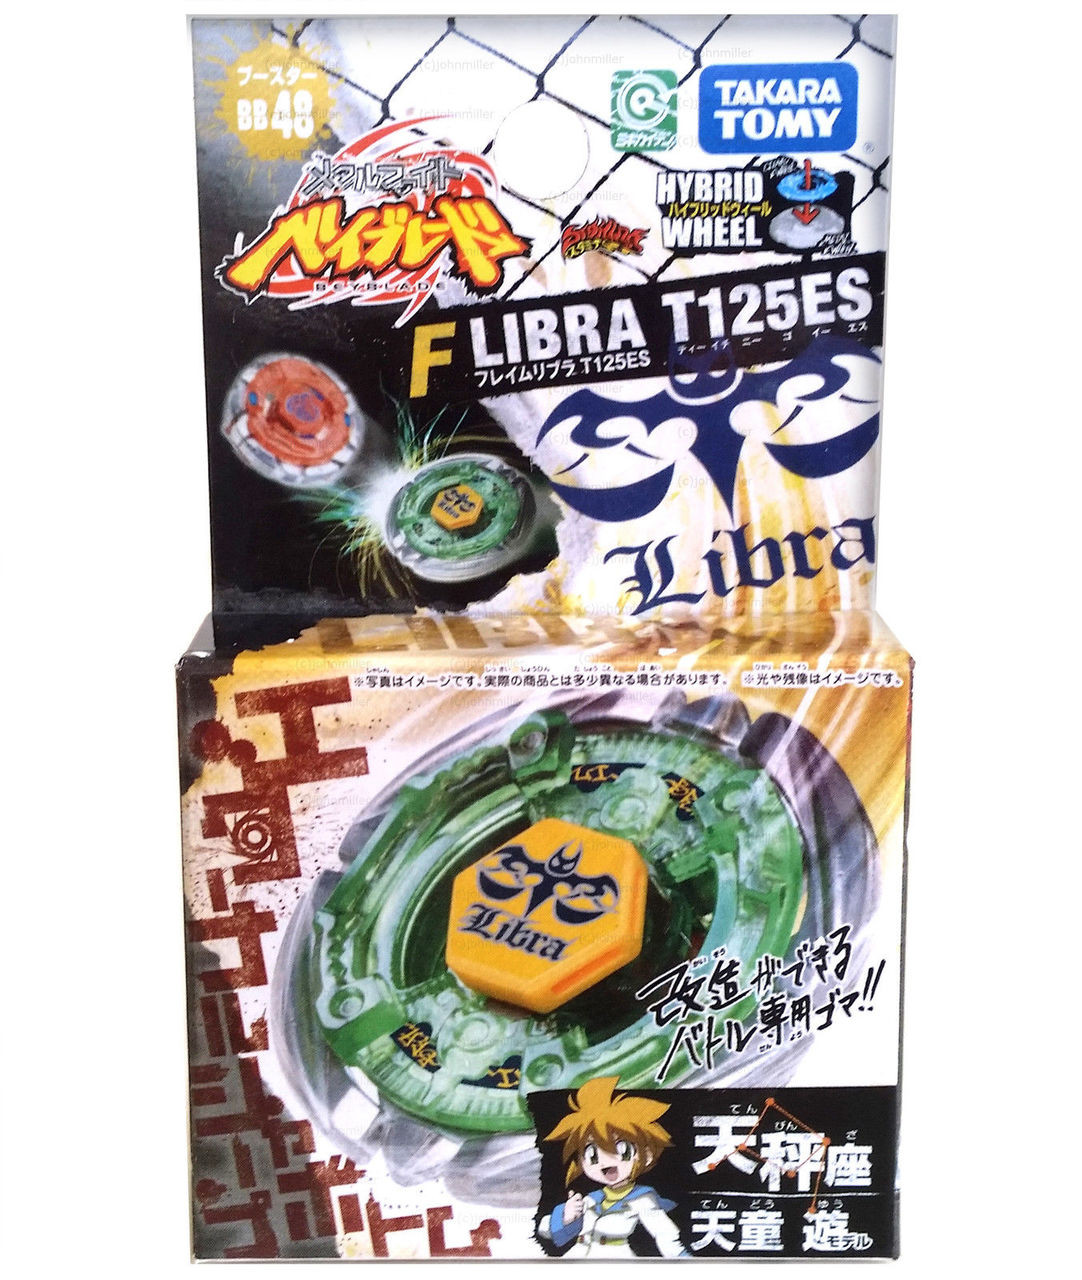 Flame Libra T125ES Metal Fusion Beyblade Booster BB-48